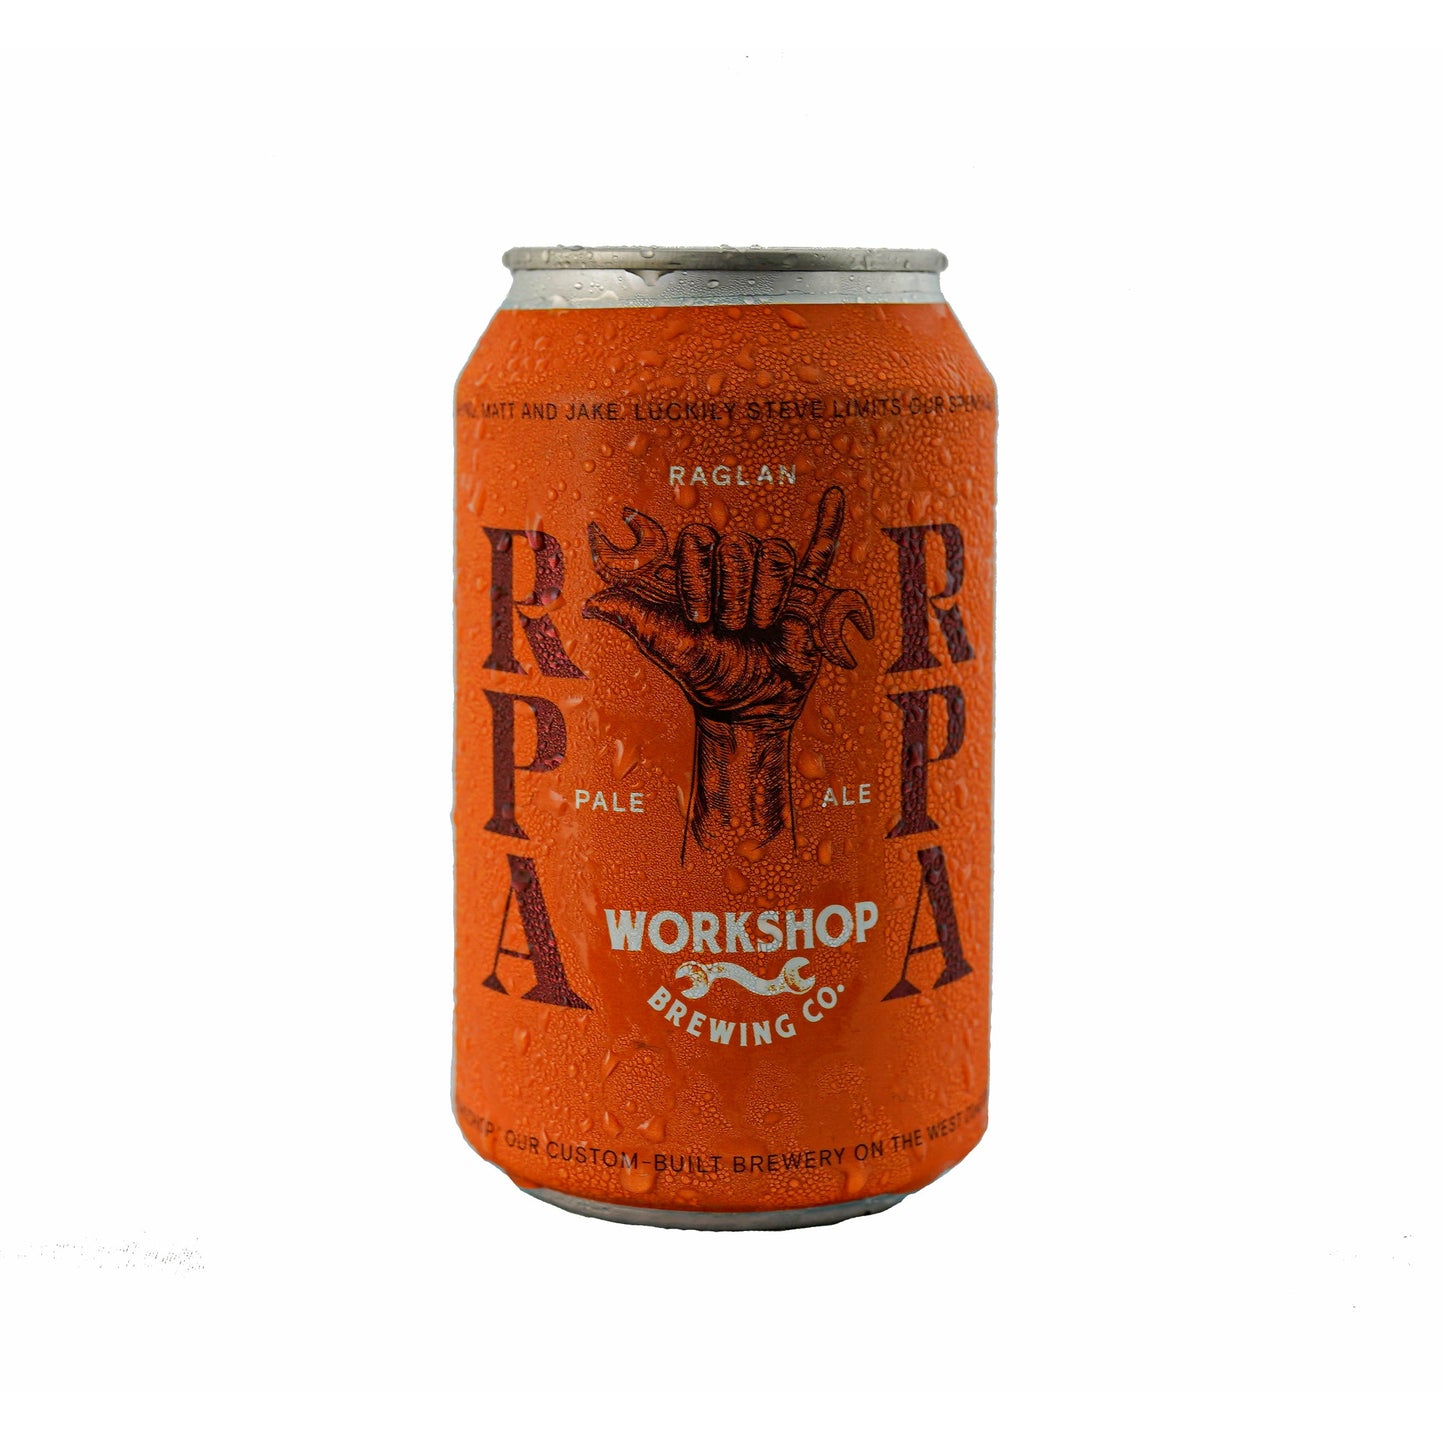 RPA - 6 pack 330ml cans